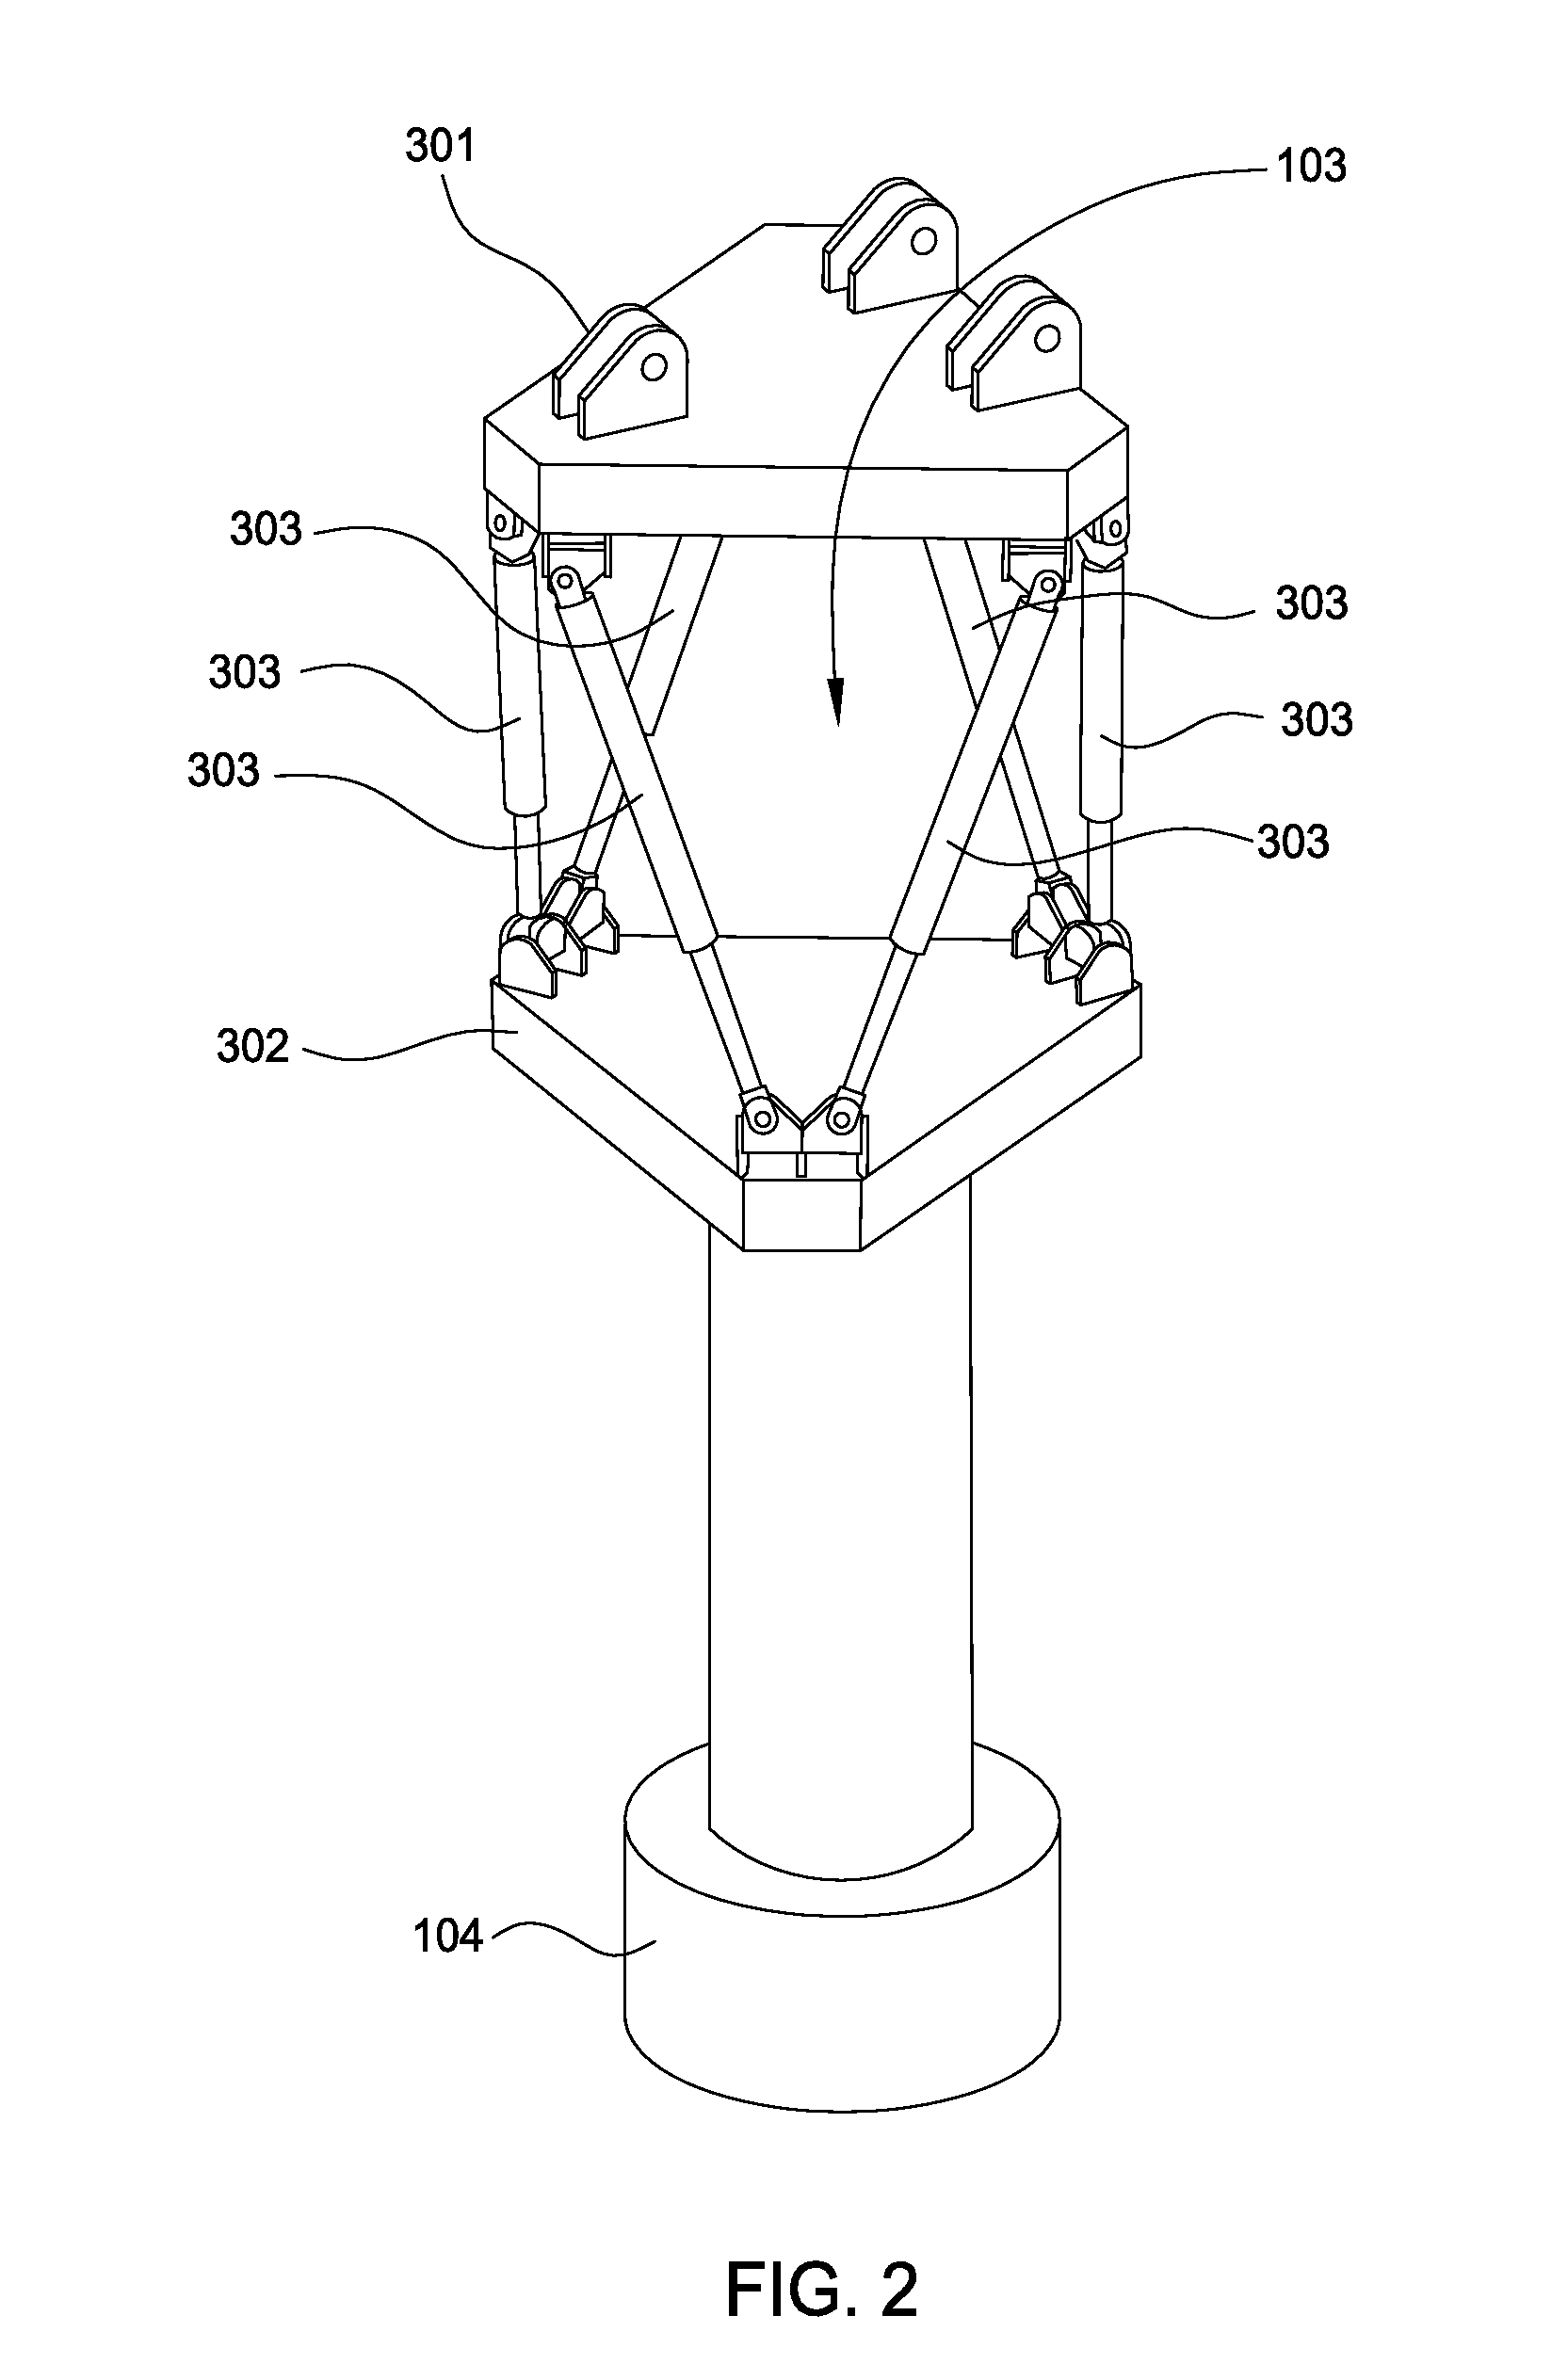 Apparatus and methods of positioning a subsea object